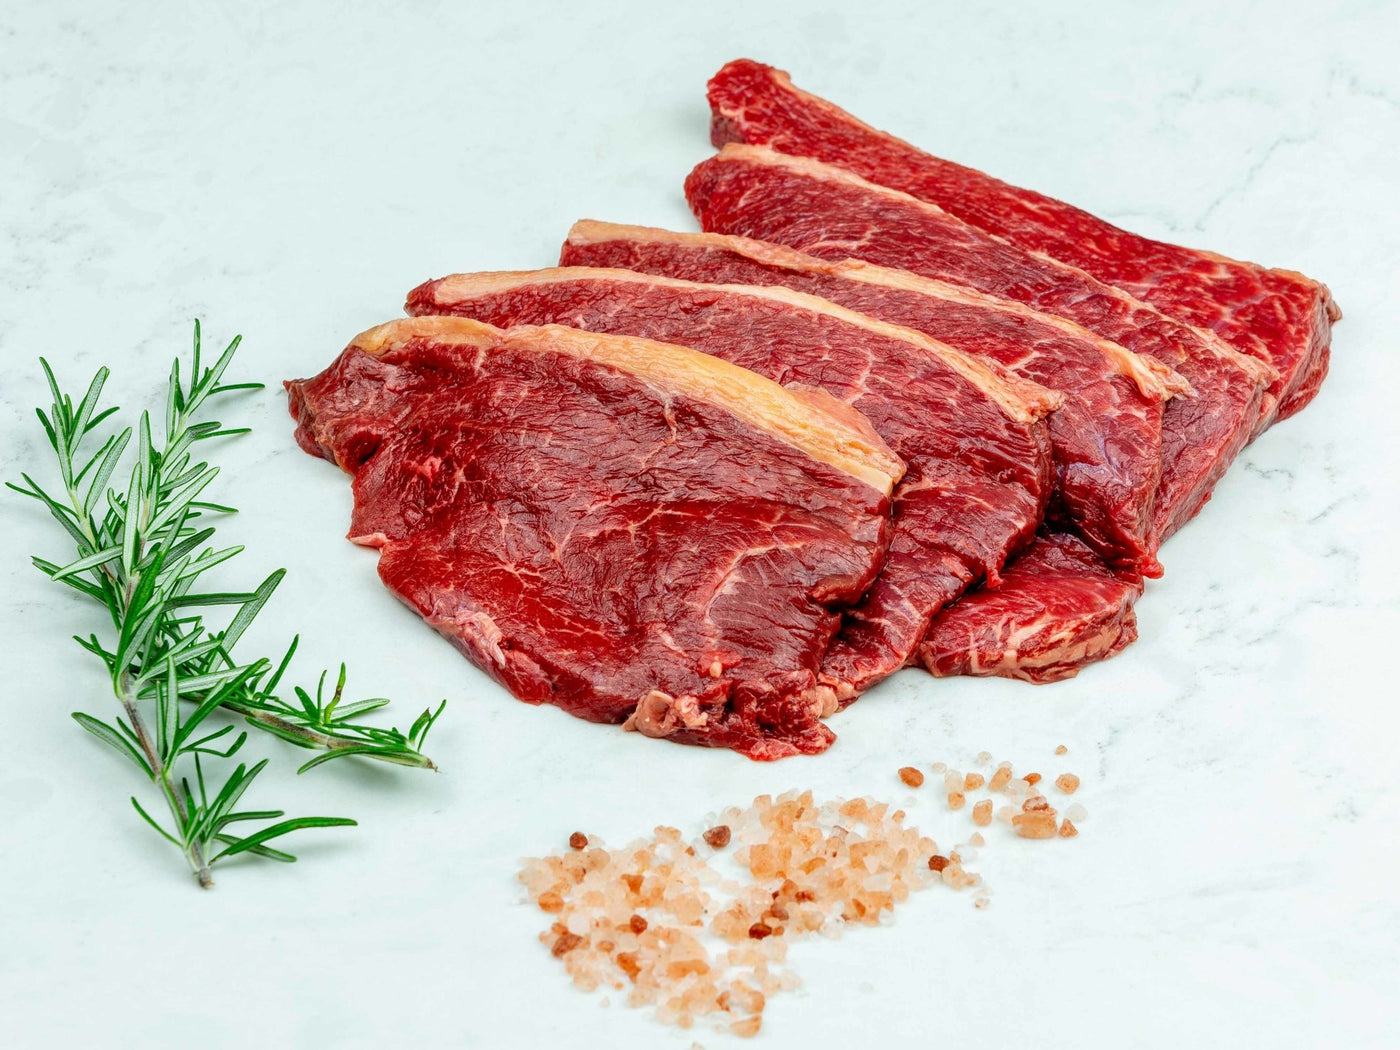 Grass Fed, Dry-Aged Minute Steaks - Beef - Thomas Joseph Butchery - Ethical Dry-Aged Meat The Best Steak UK Thomas Joseph Butchery